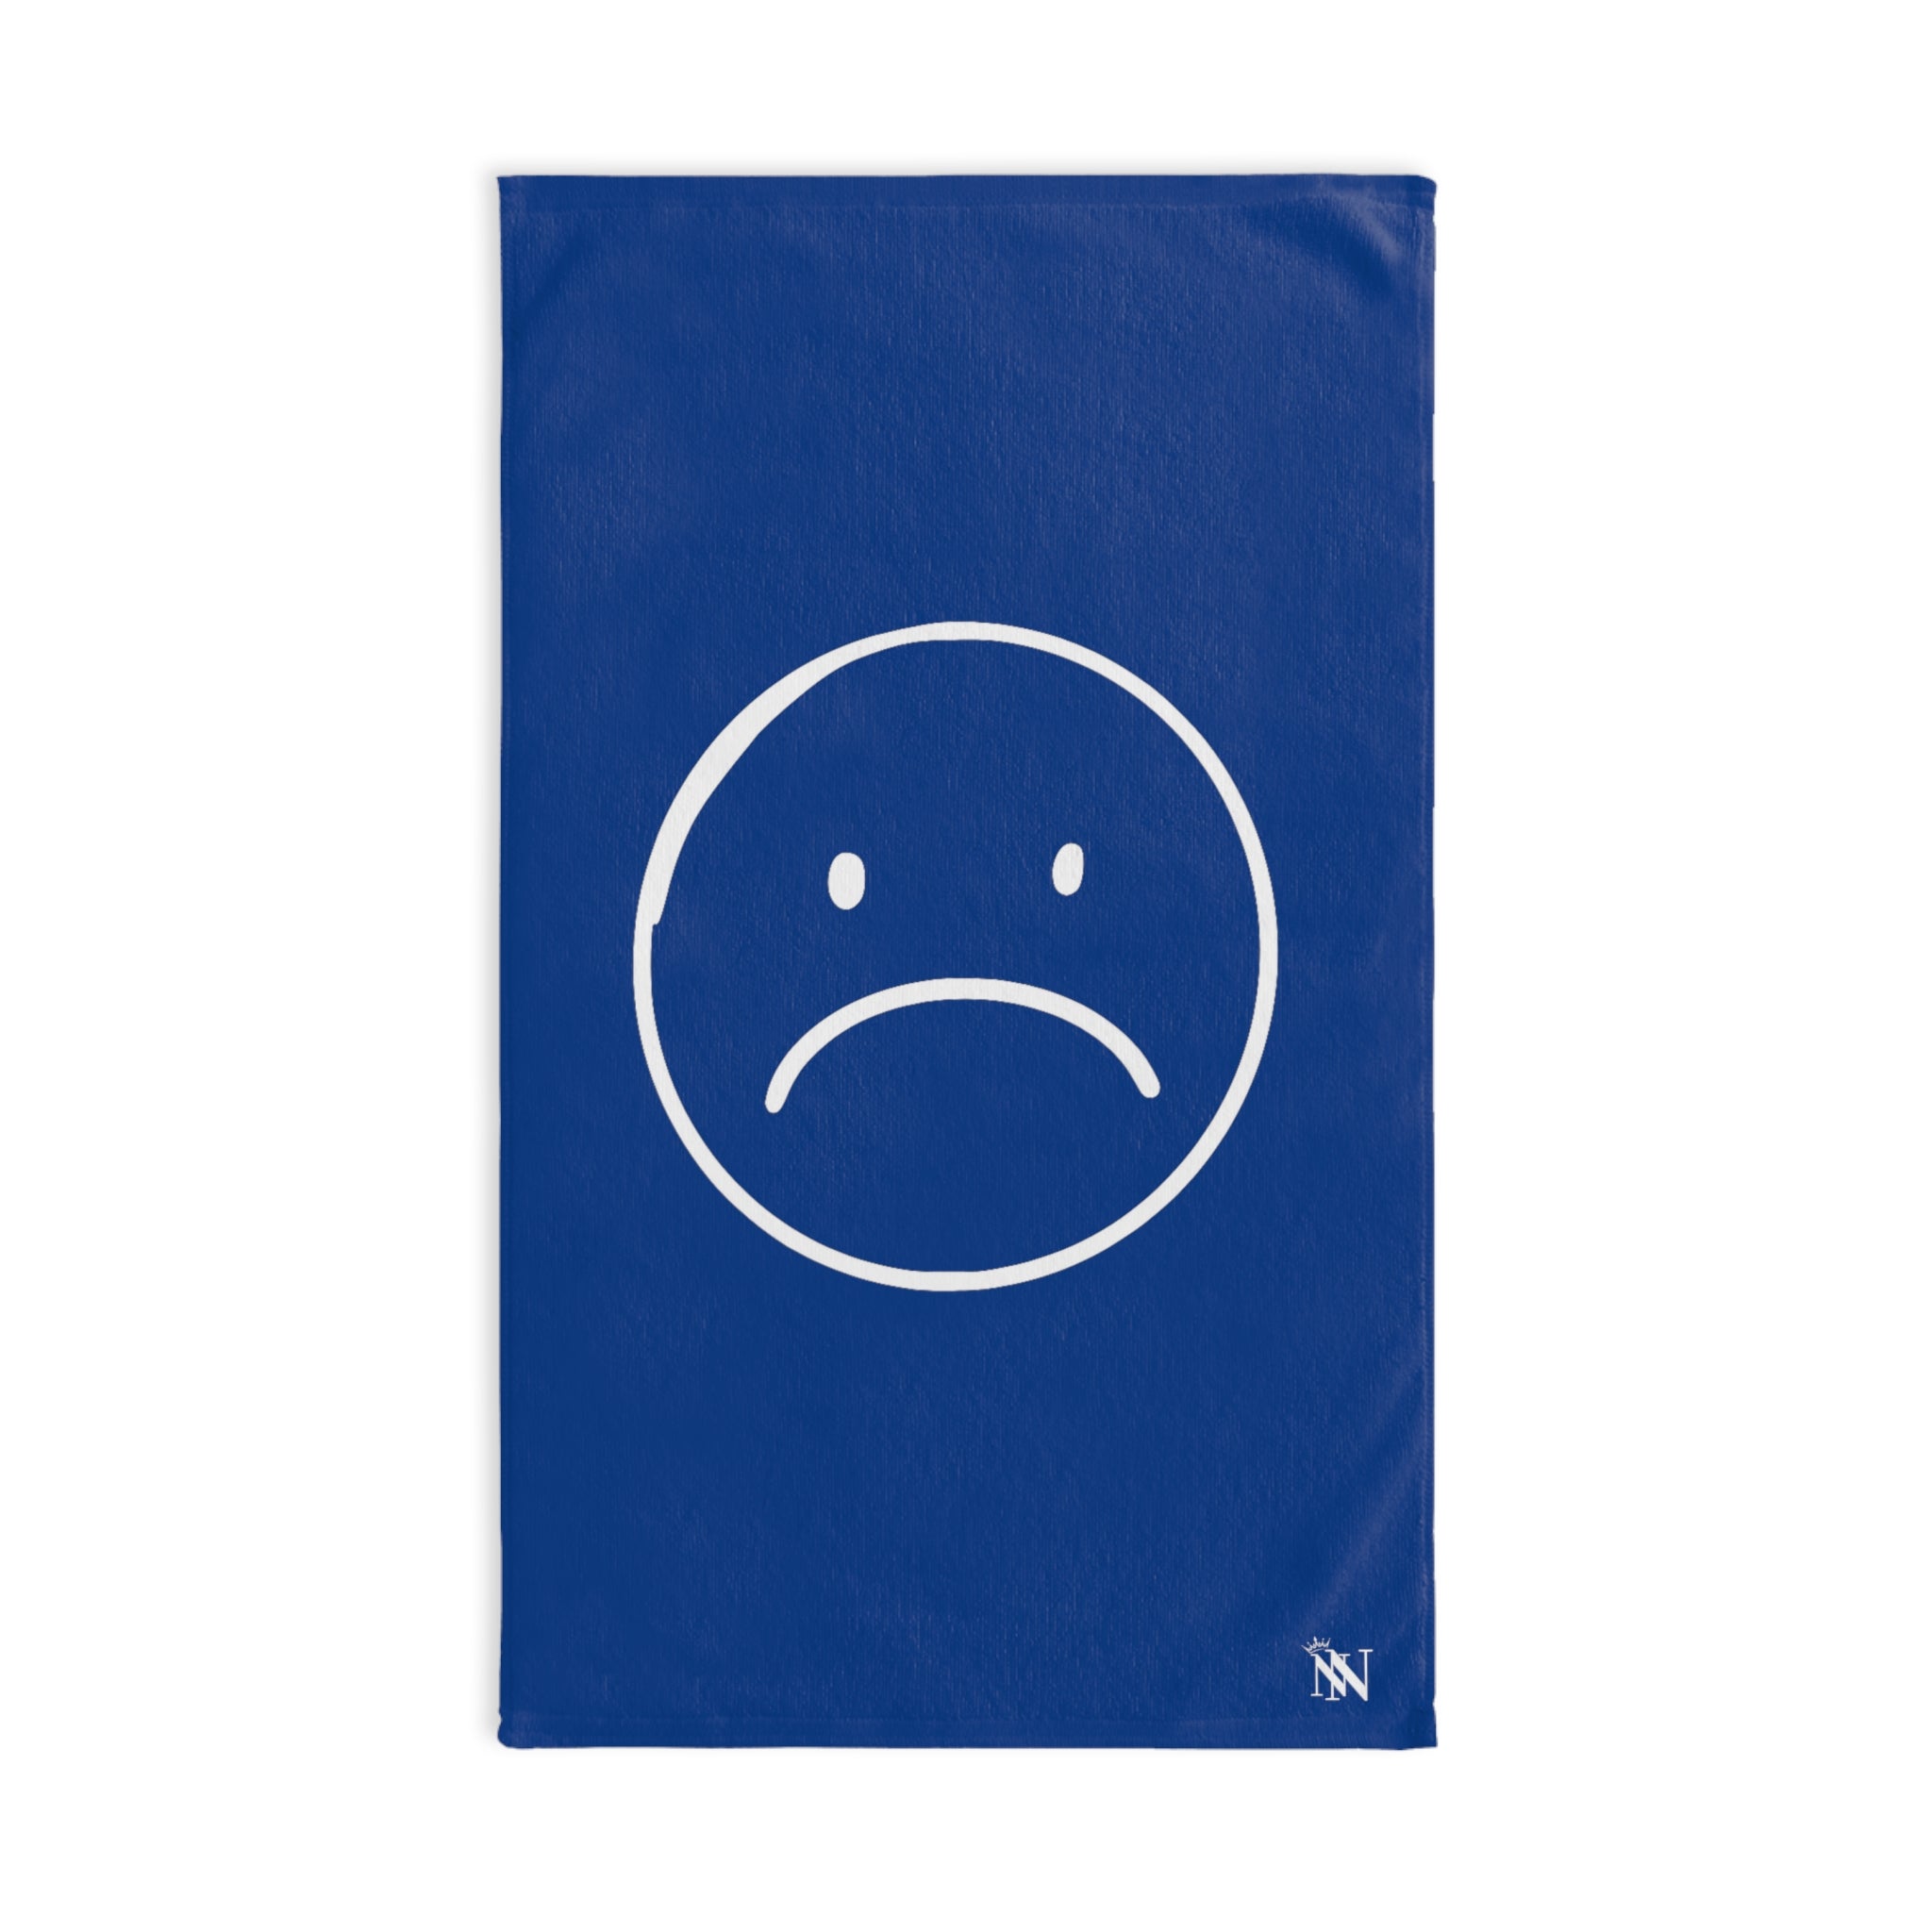 Sad Frown White Blue | Gifts for Boyfriend, Funny Towel Romantic Gift for Wedding Couple Fiance First Year Anniversary Valentines, Party Gag Gifts, Joke Humor Cloth for Husband Men BF NECTAR NAPKINS